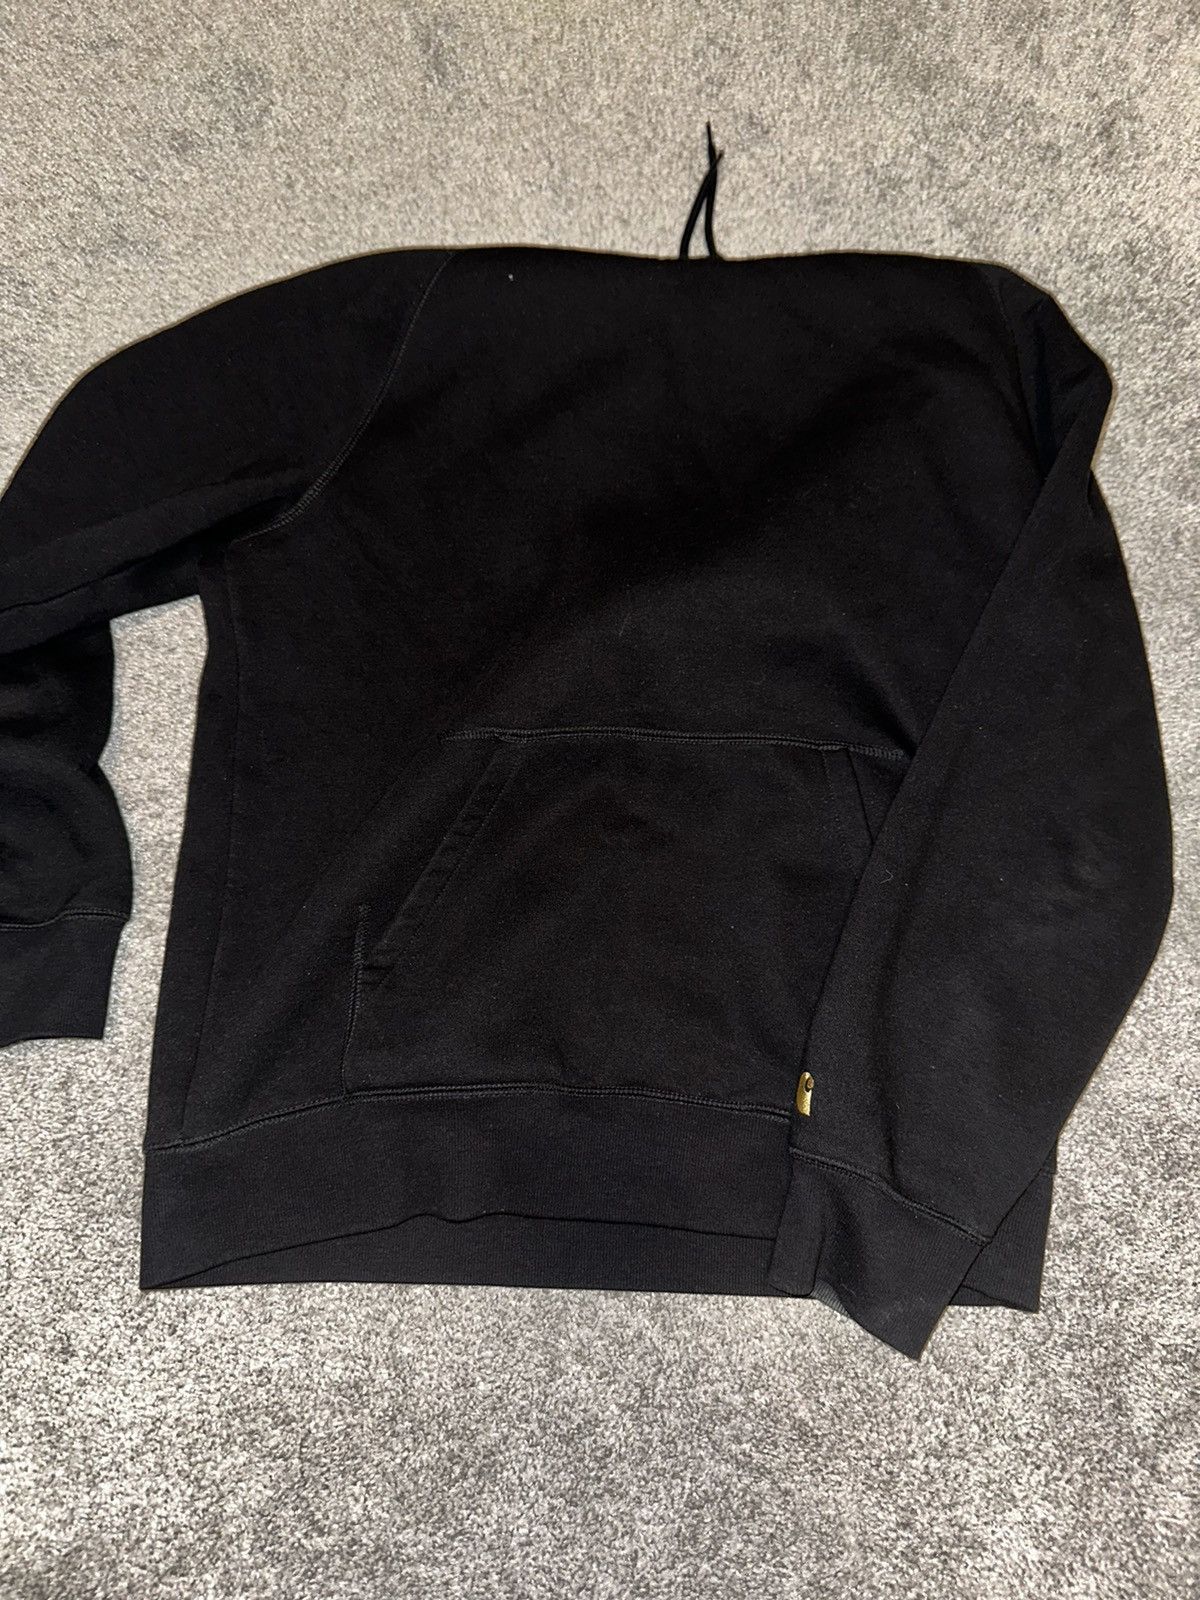 Carhartt Wip Carhartt WIP chase hoodie Size US M / EU 48-50 / 2 - 1 Preview